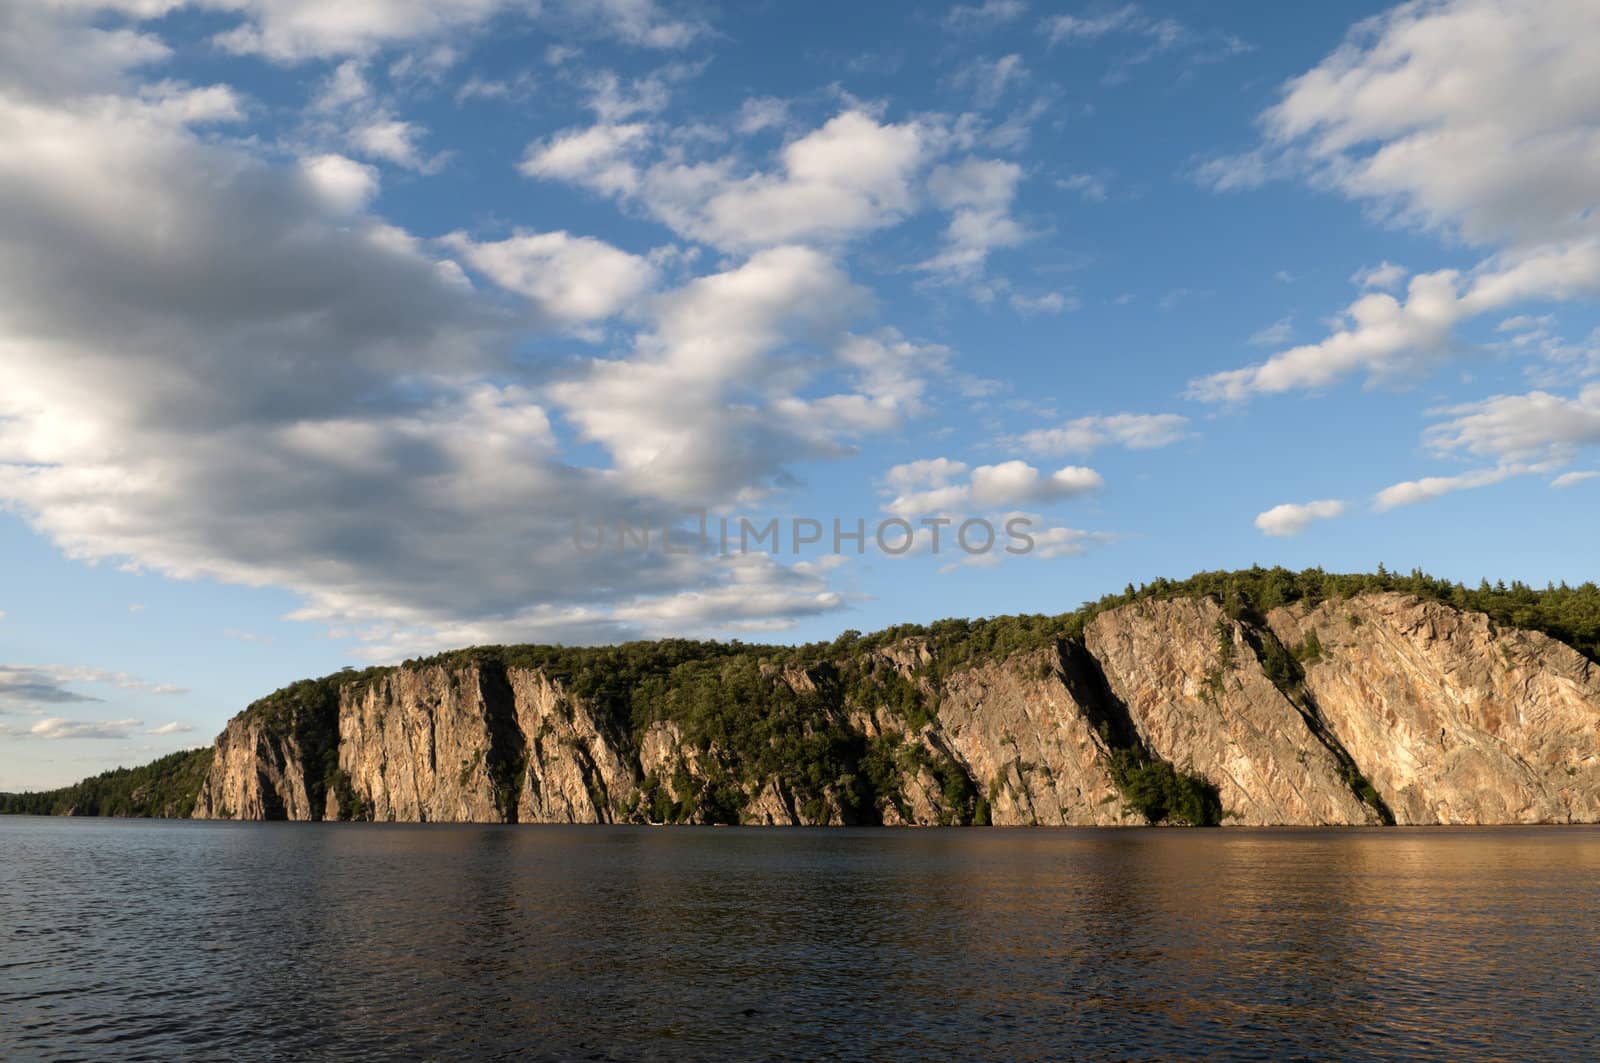 Northern Ontario Lake and Cliffside by Gordo25